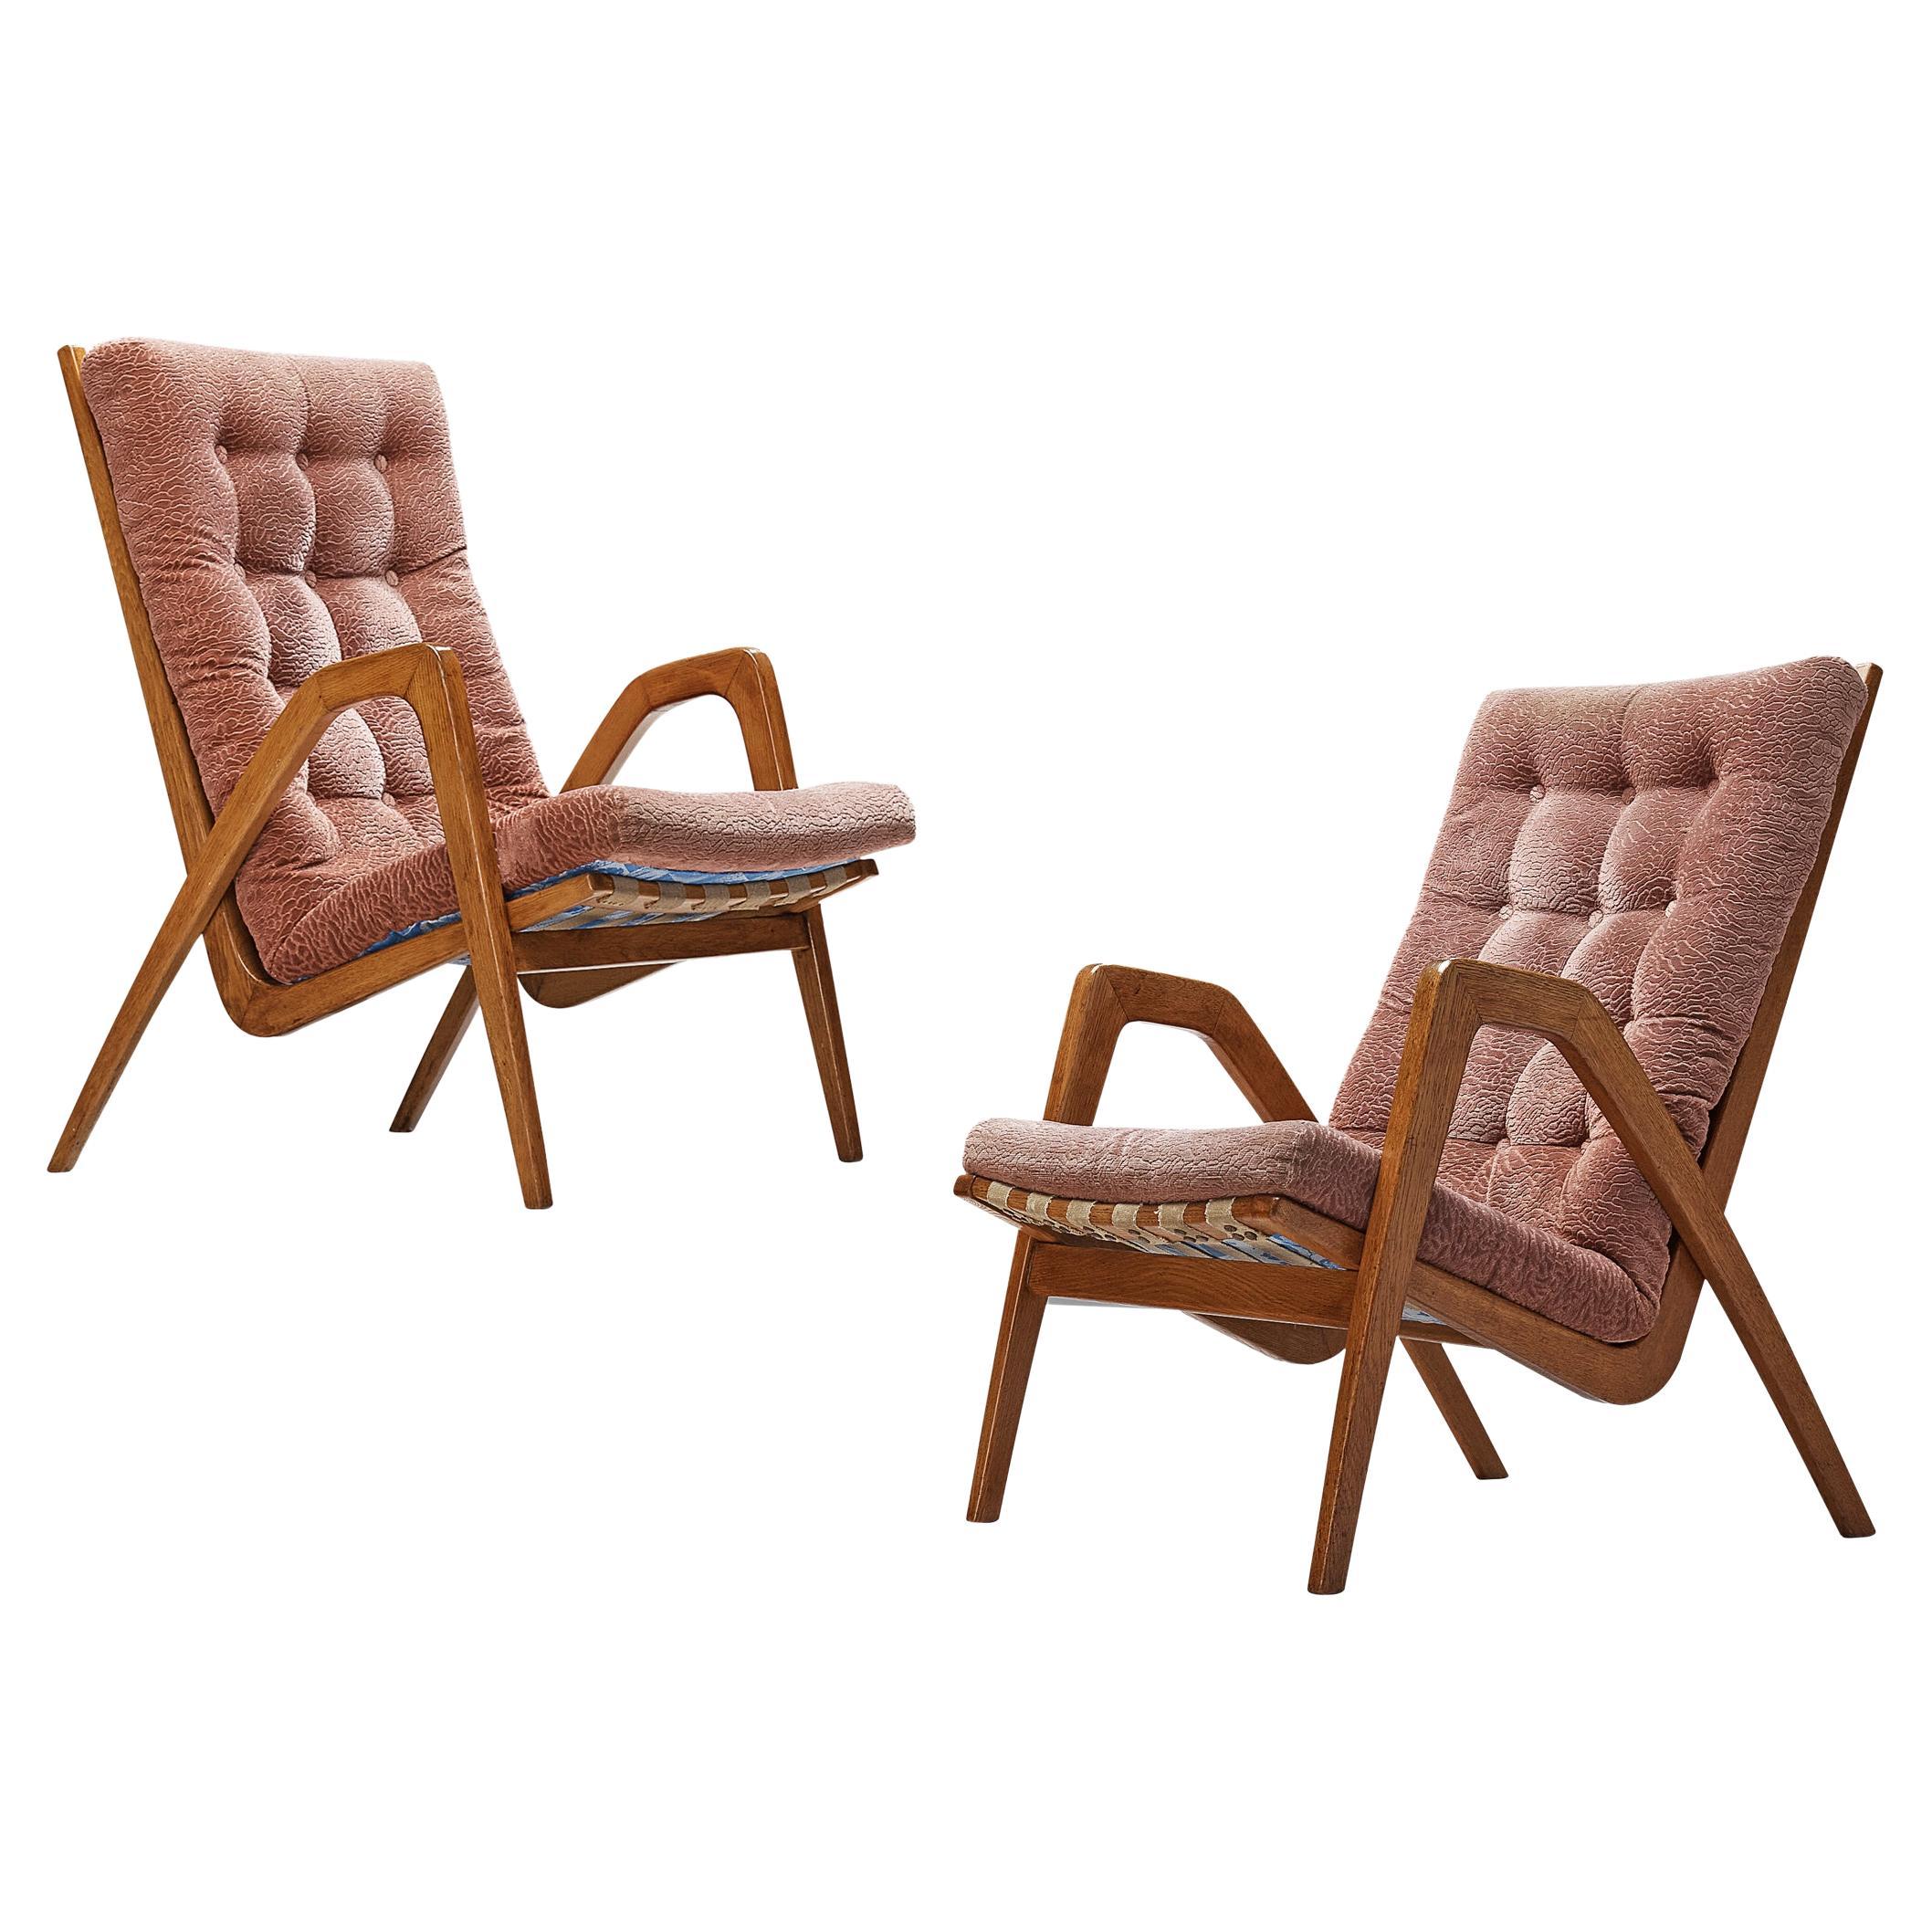 Sculptural Pair of Lounge Chairs in Oak and Burgundy Upholstery For Sale